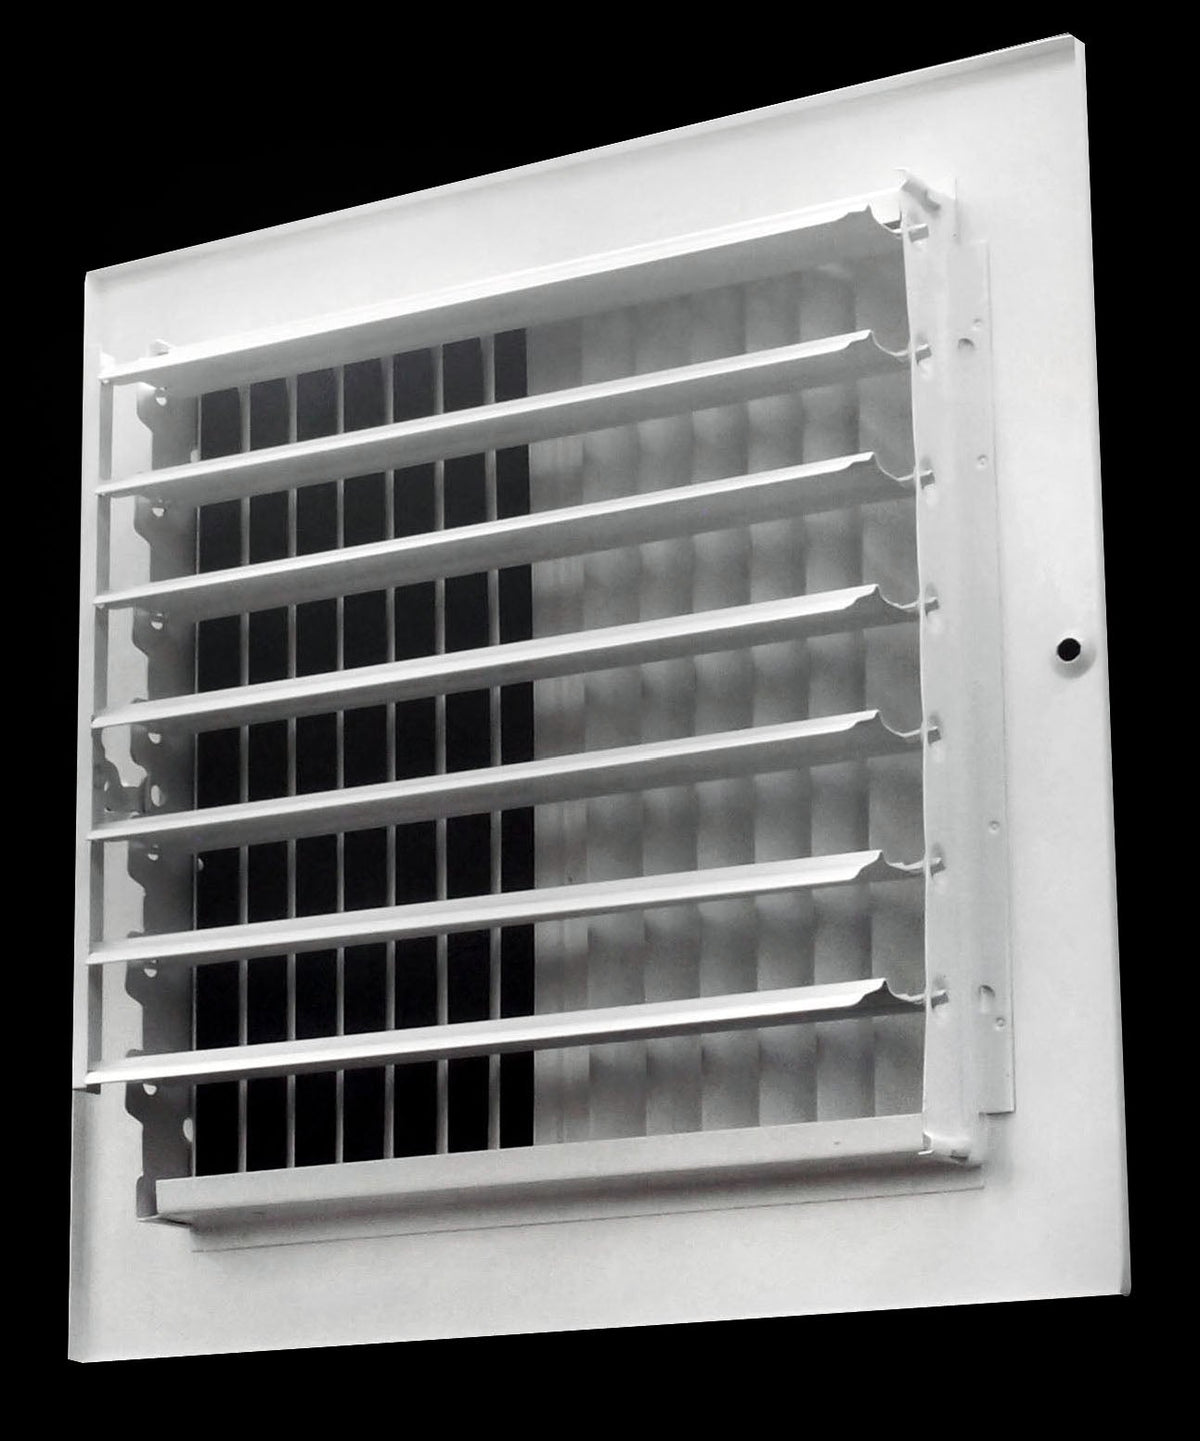 10&quot; X 10&quot; 2-Way Vertical AIR SUPPLY GRILLE - DUCT COVER &amp; DIFFUSER - Flat Stamped Face - White [Outer Dimensions: 11.75&quot;w X 11.75&quot;h]